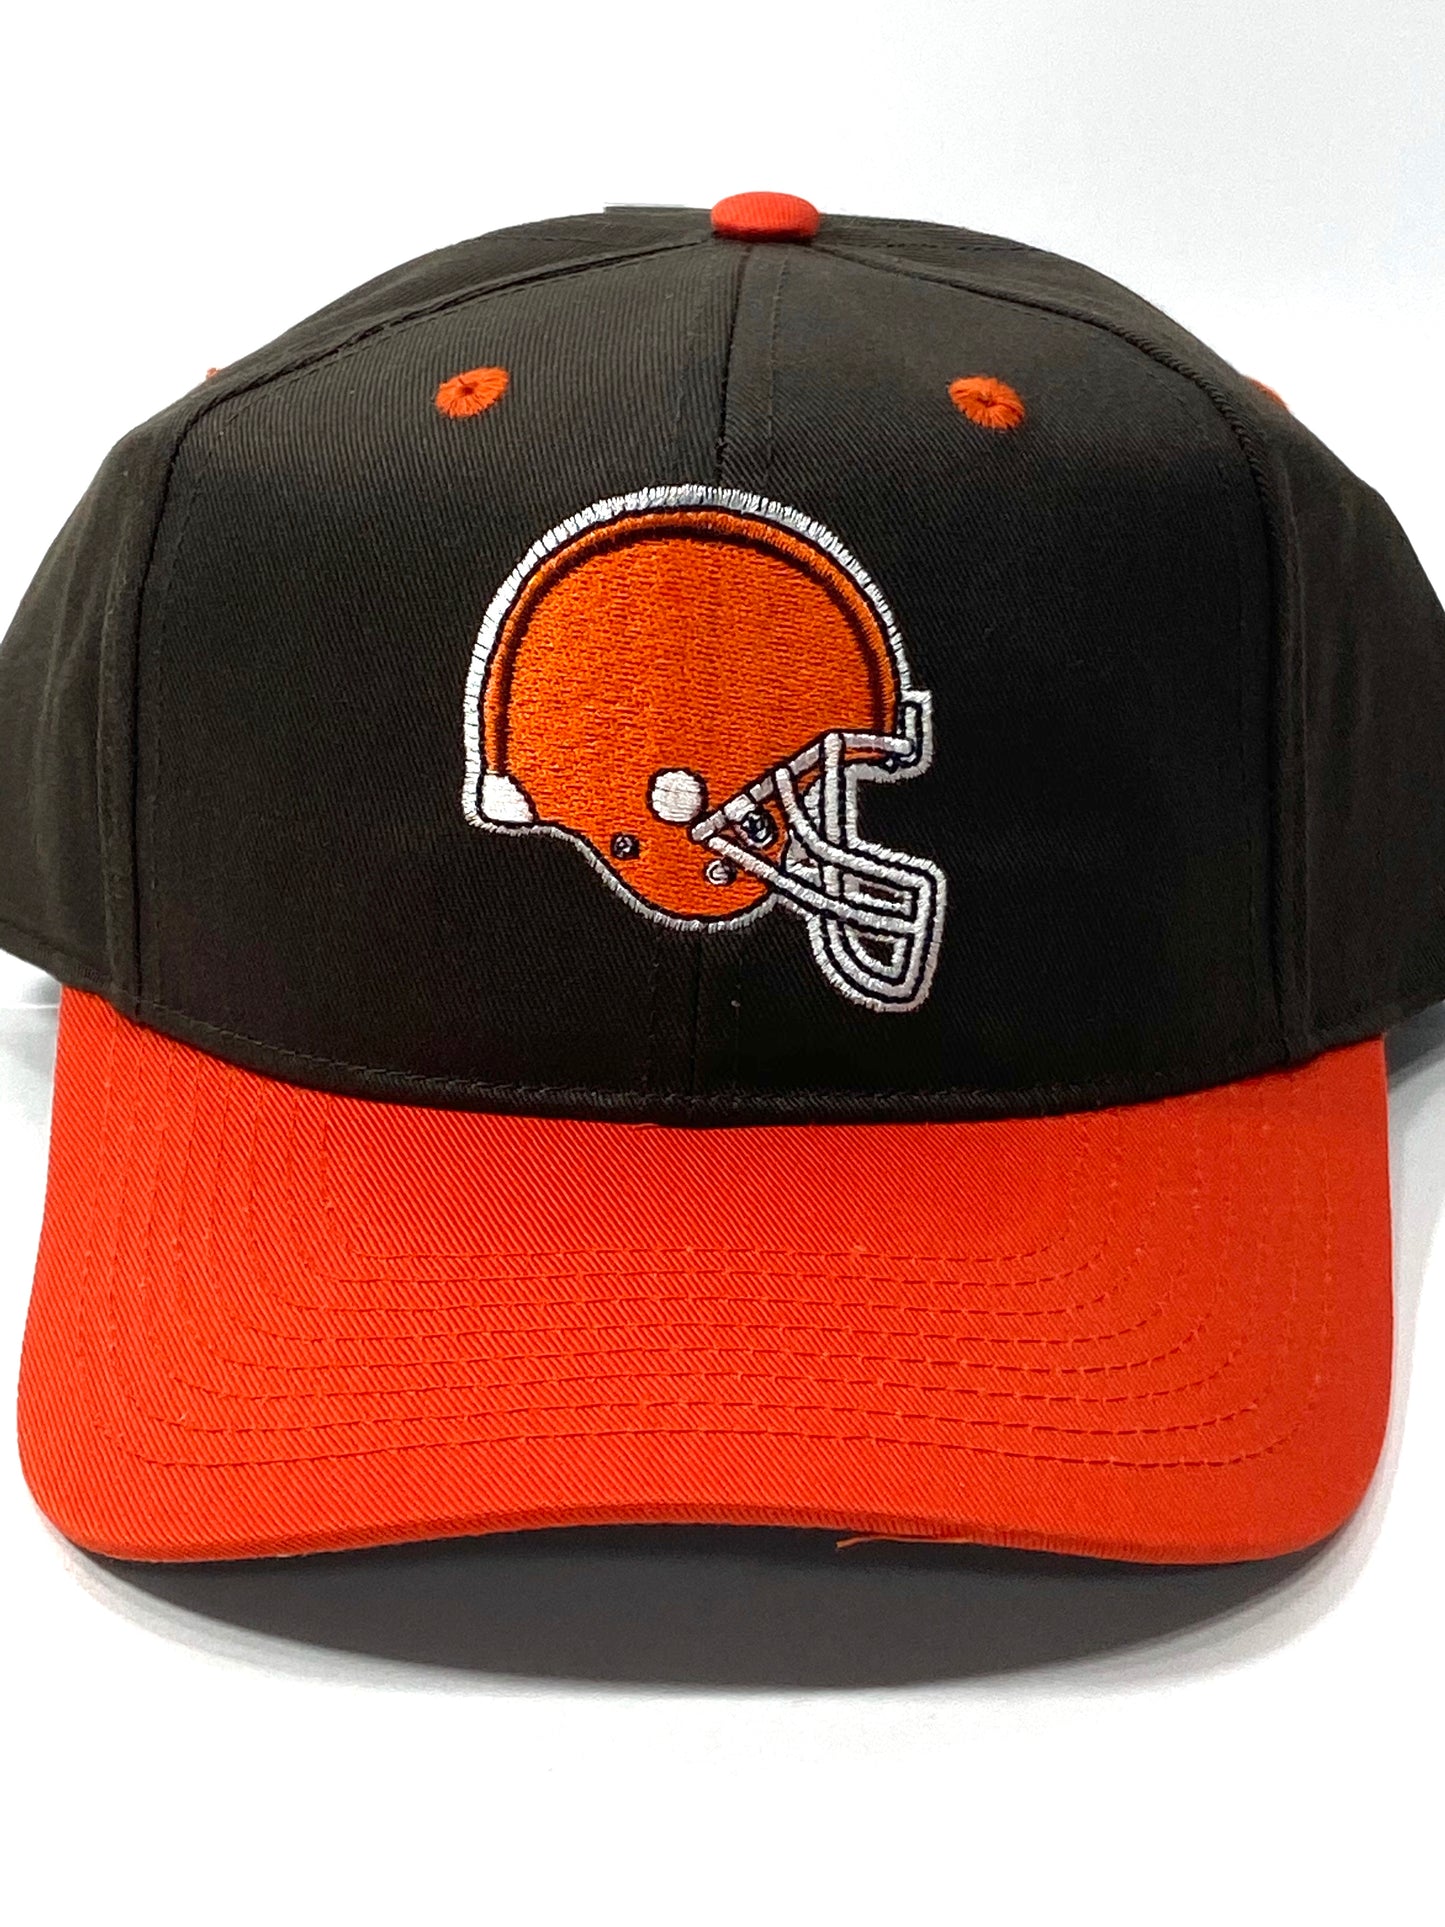 Cleveland Browns Vintage NFL Team Color Replica Snapback by Drew Pearson Marketing